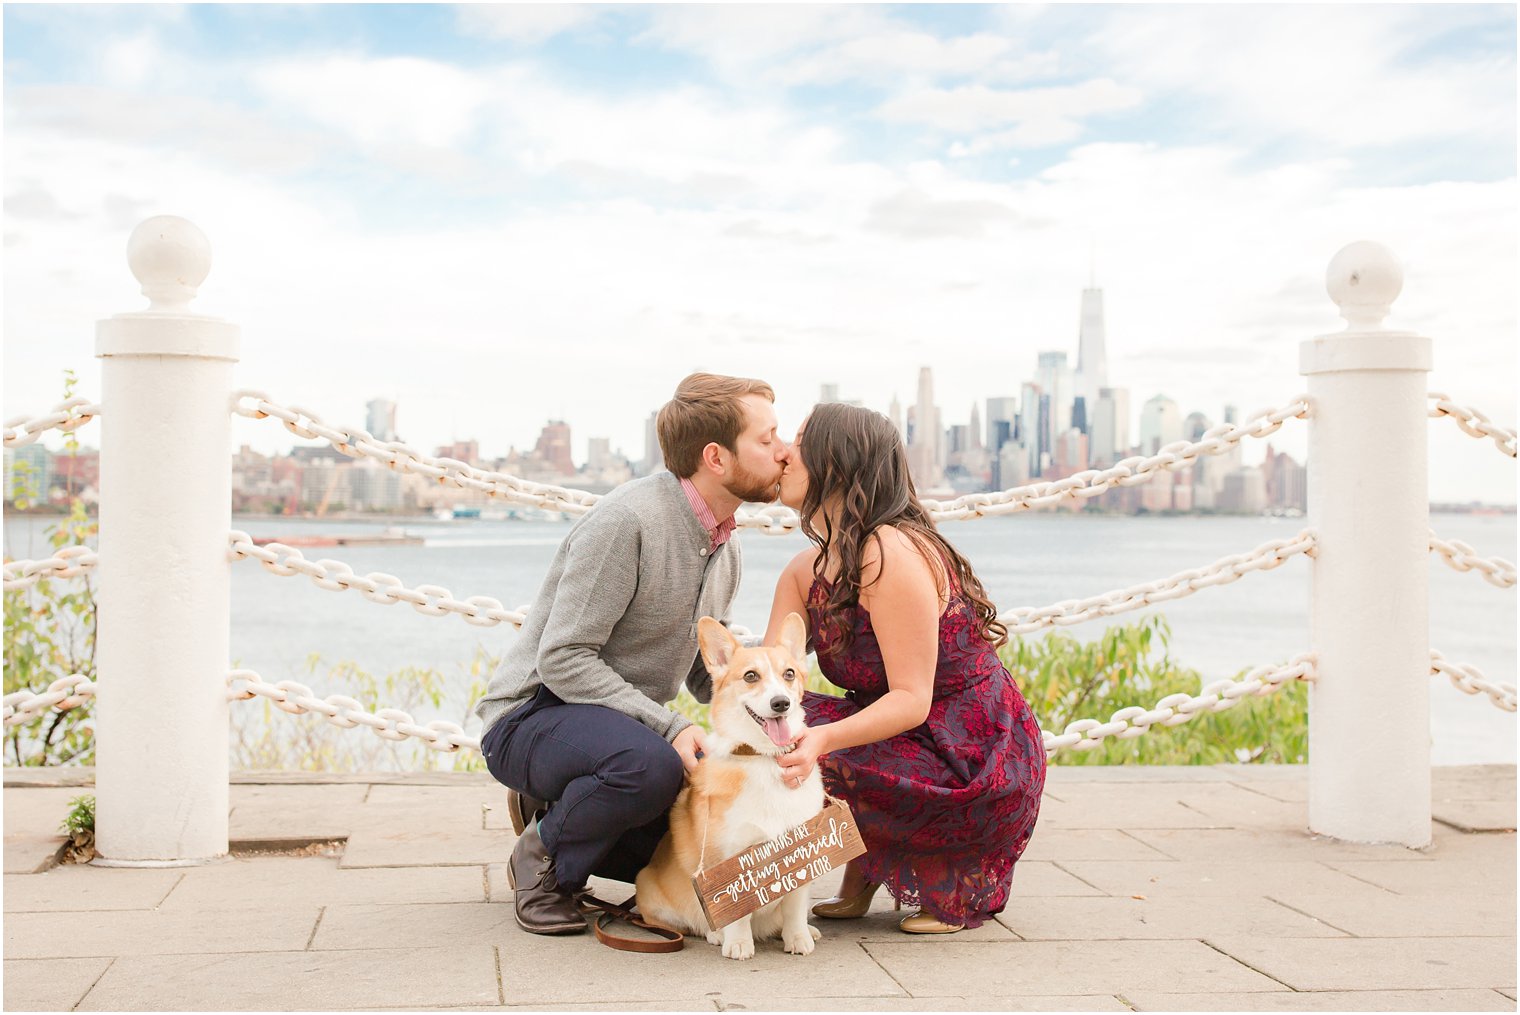 Engagement photo with dog and wooden sign